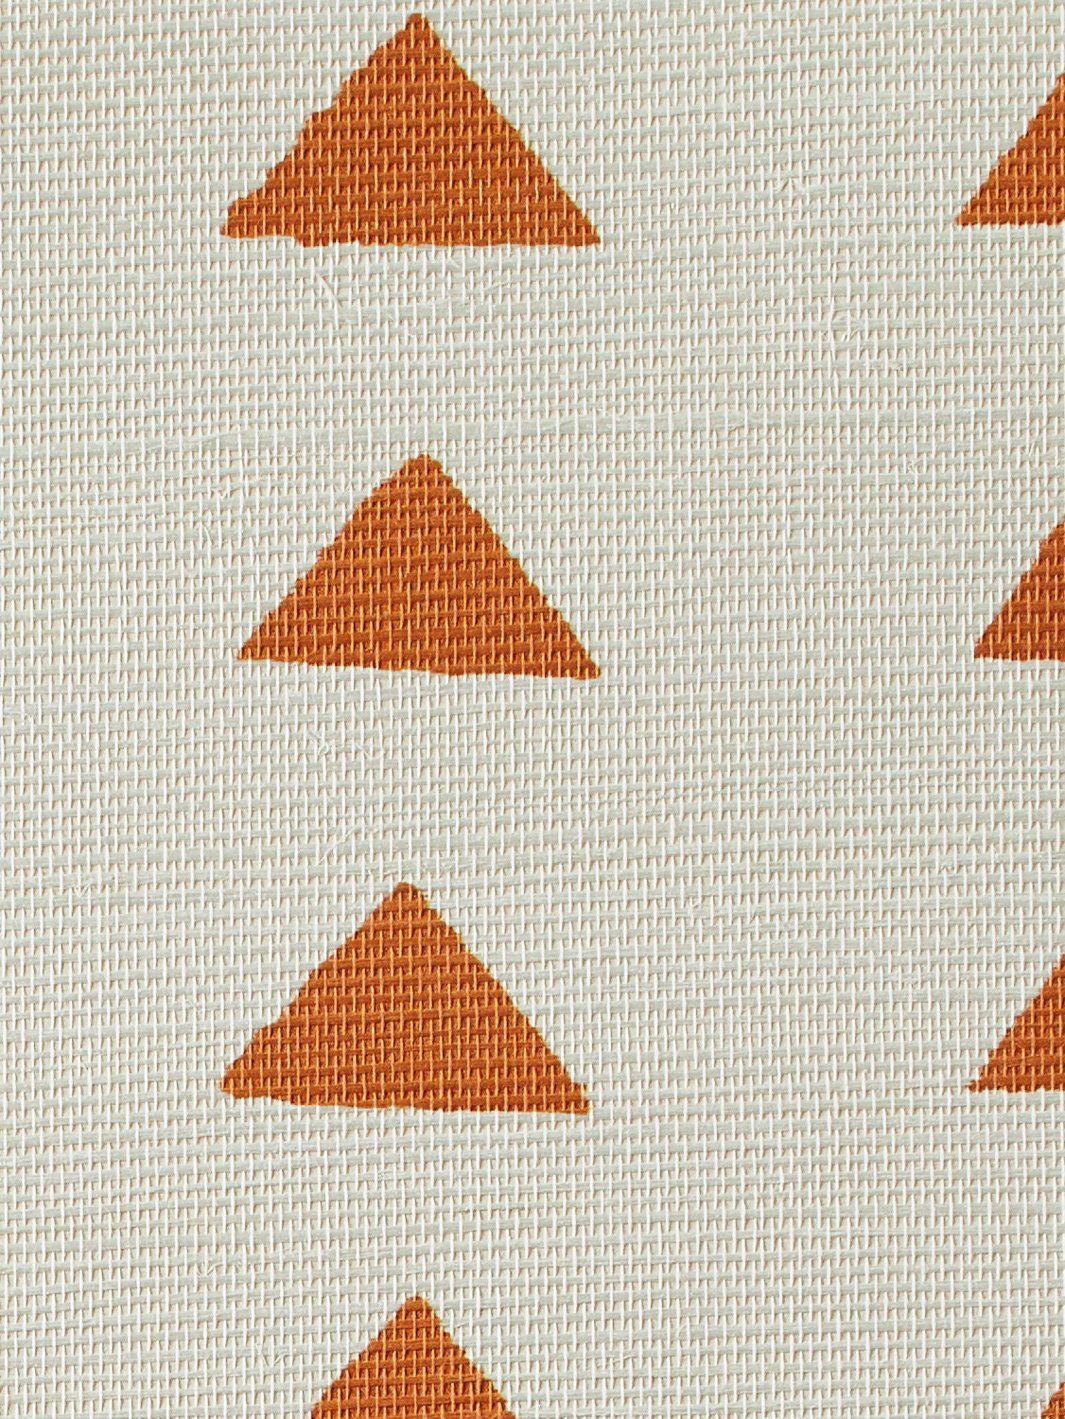 'Triangles' Grasscloth' Wallpaper by Nathan Turner - Terracotta